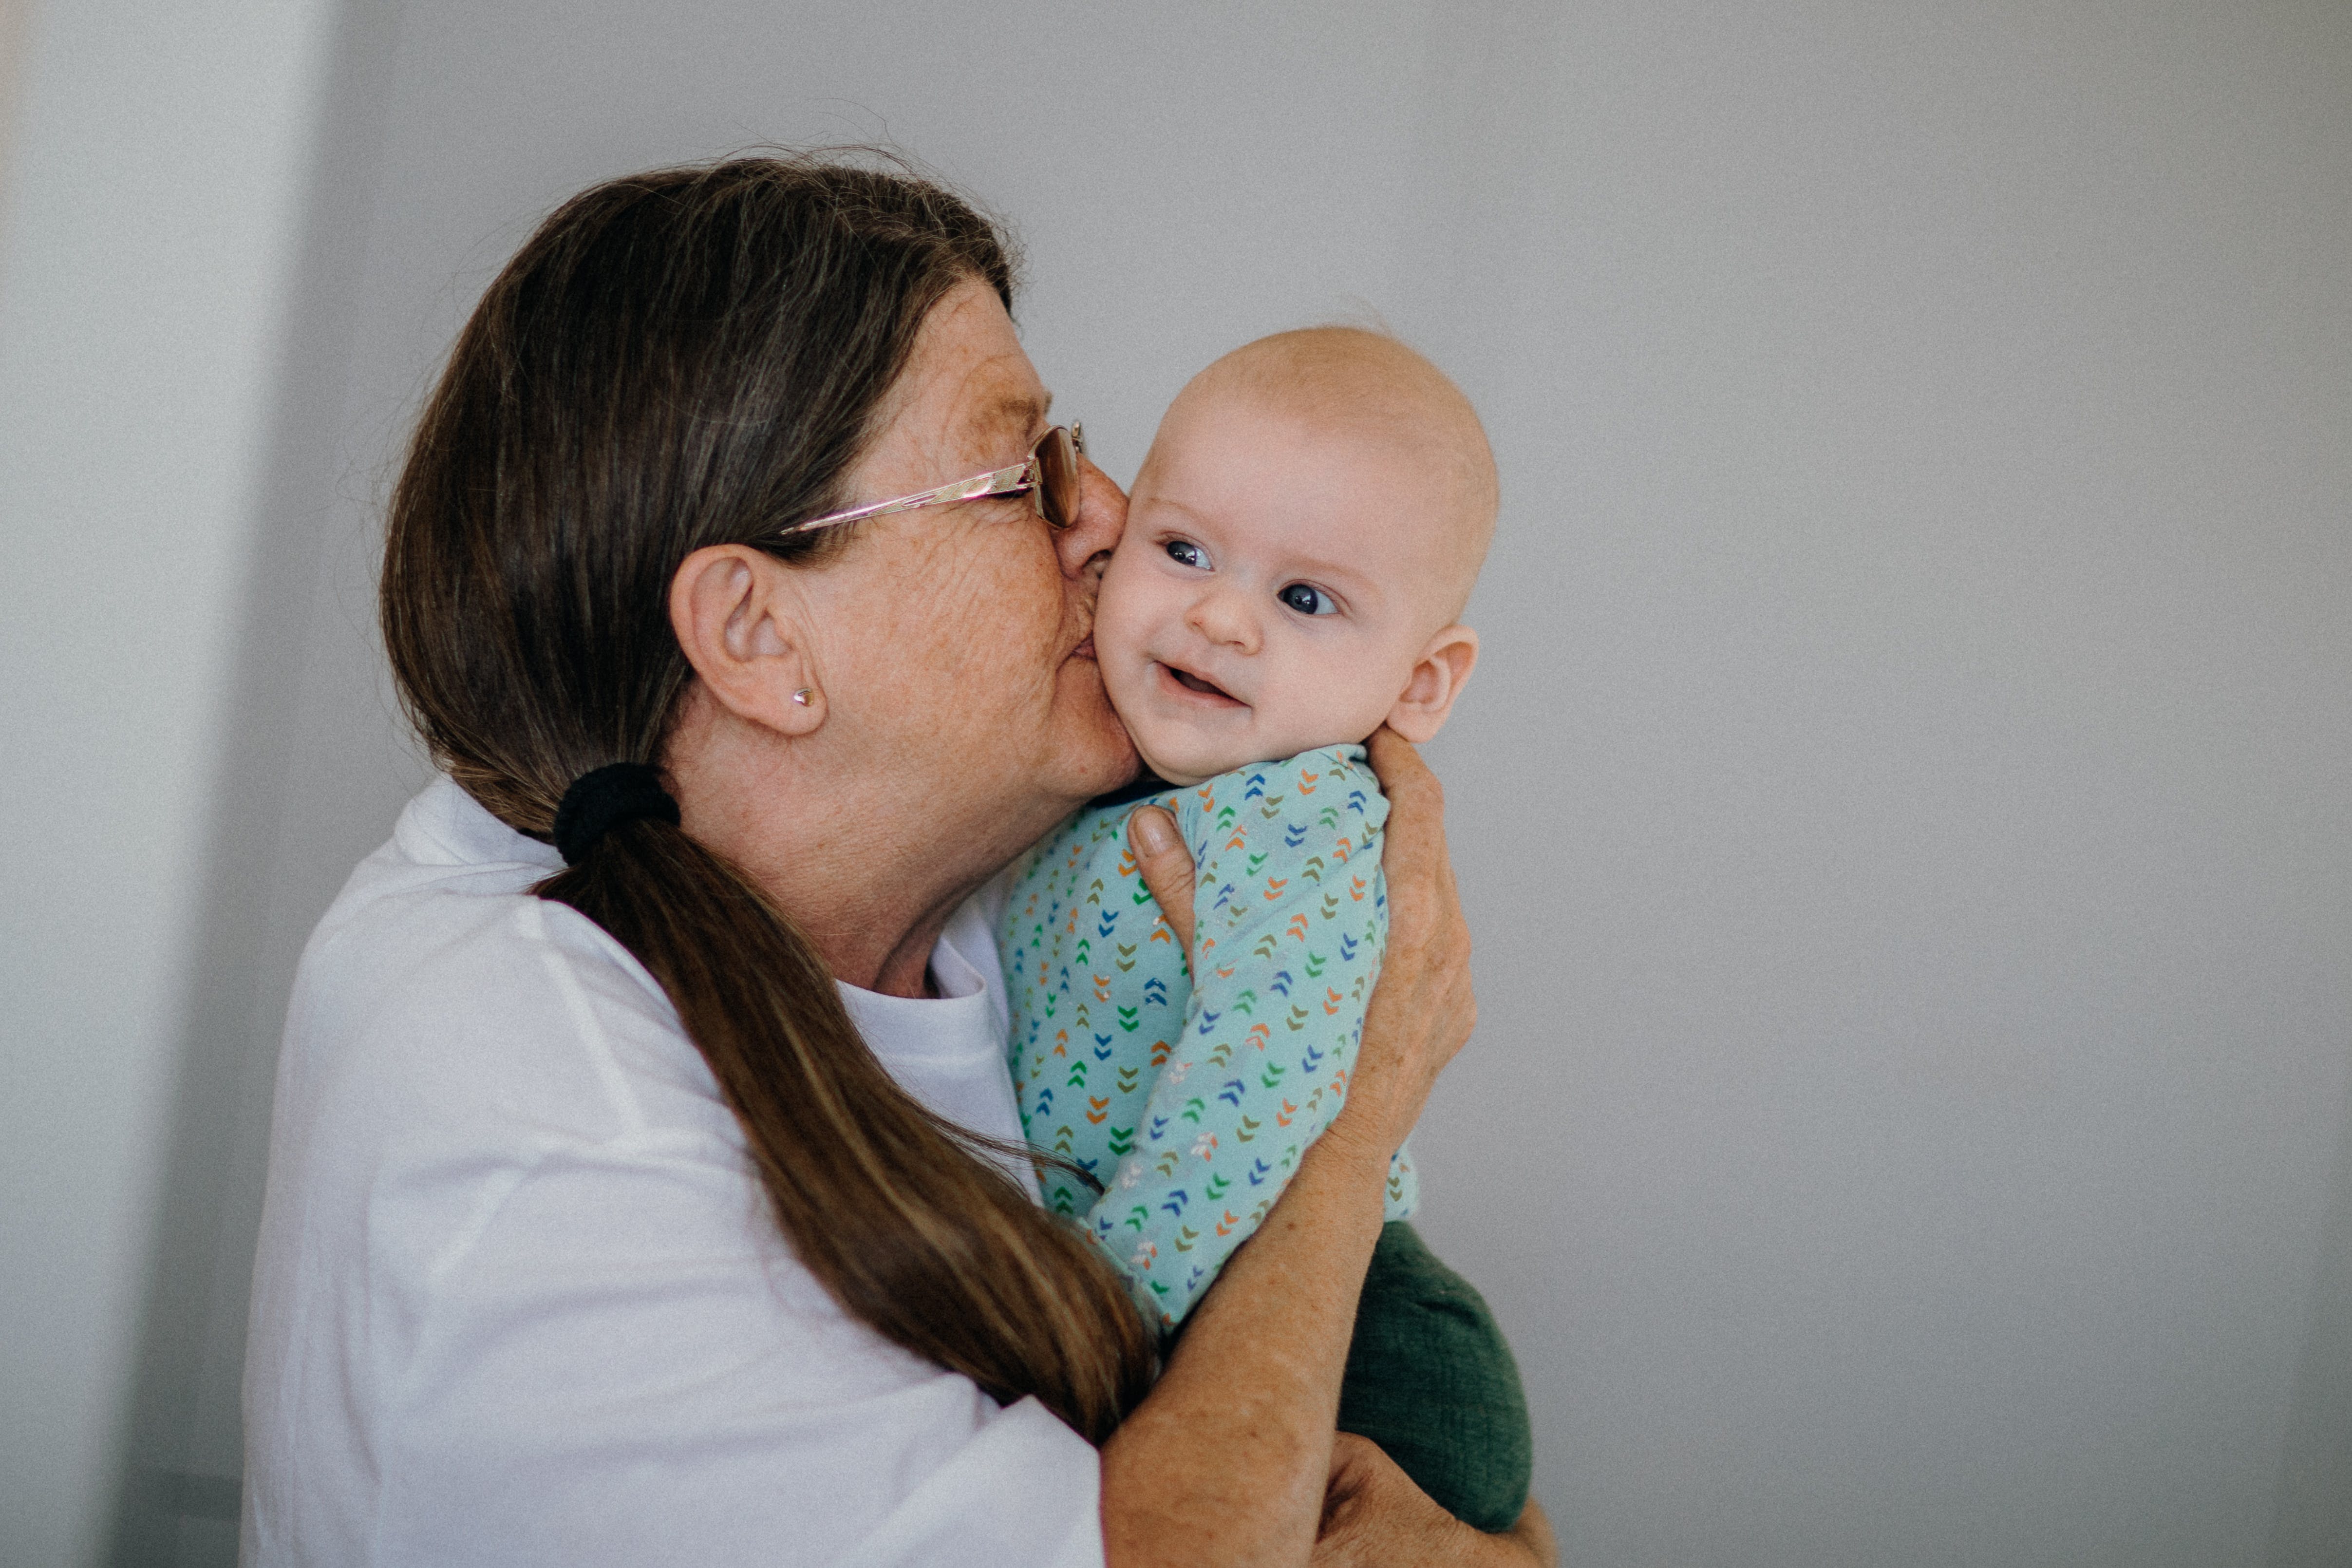 An older woman cradling and kissing an infant on the cheek | Source: Pexels